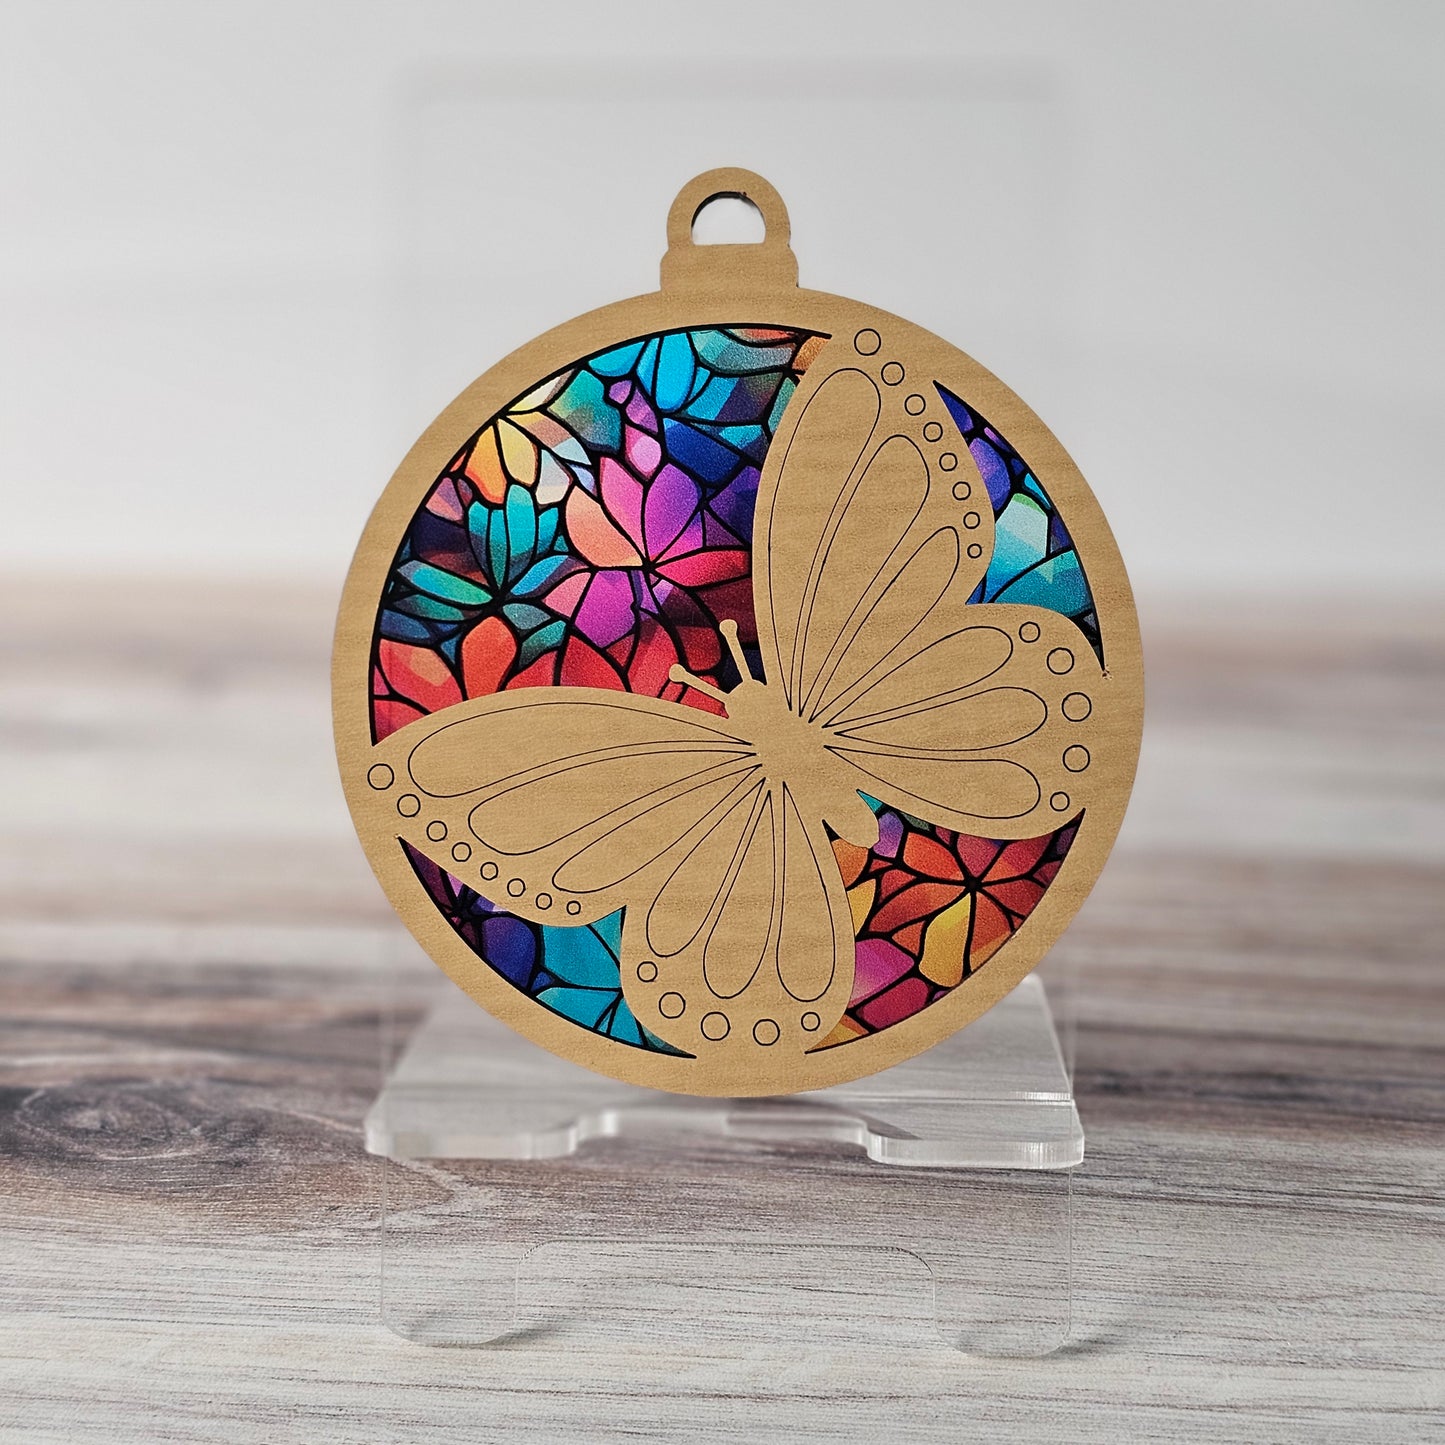 Butterfly Suncatcher Ornament - Translucent Stained Glass Floral